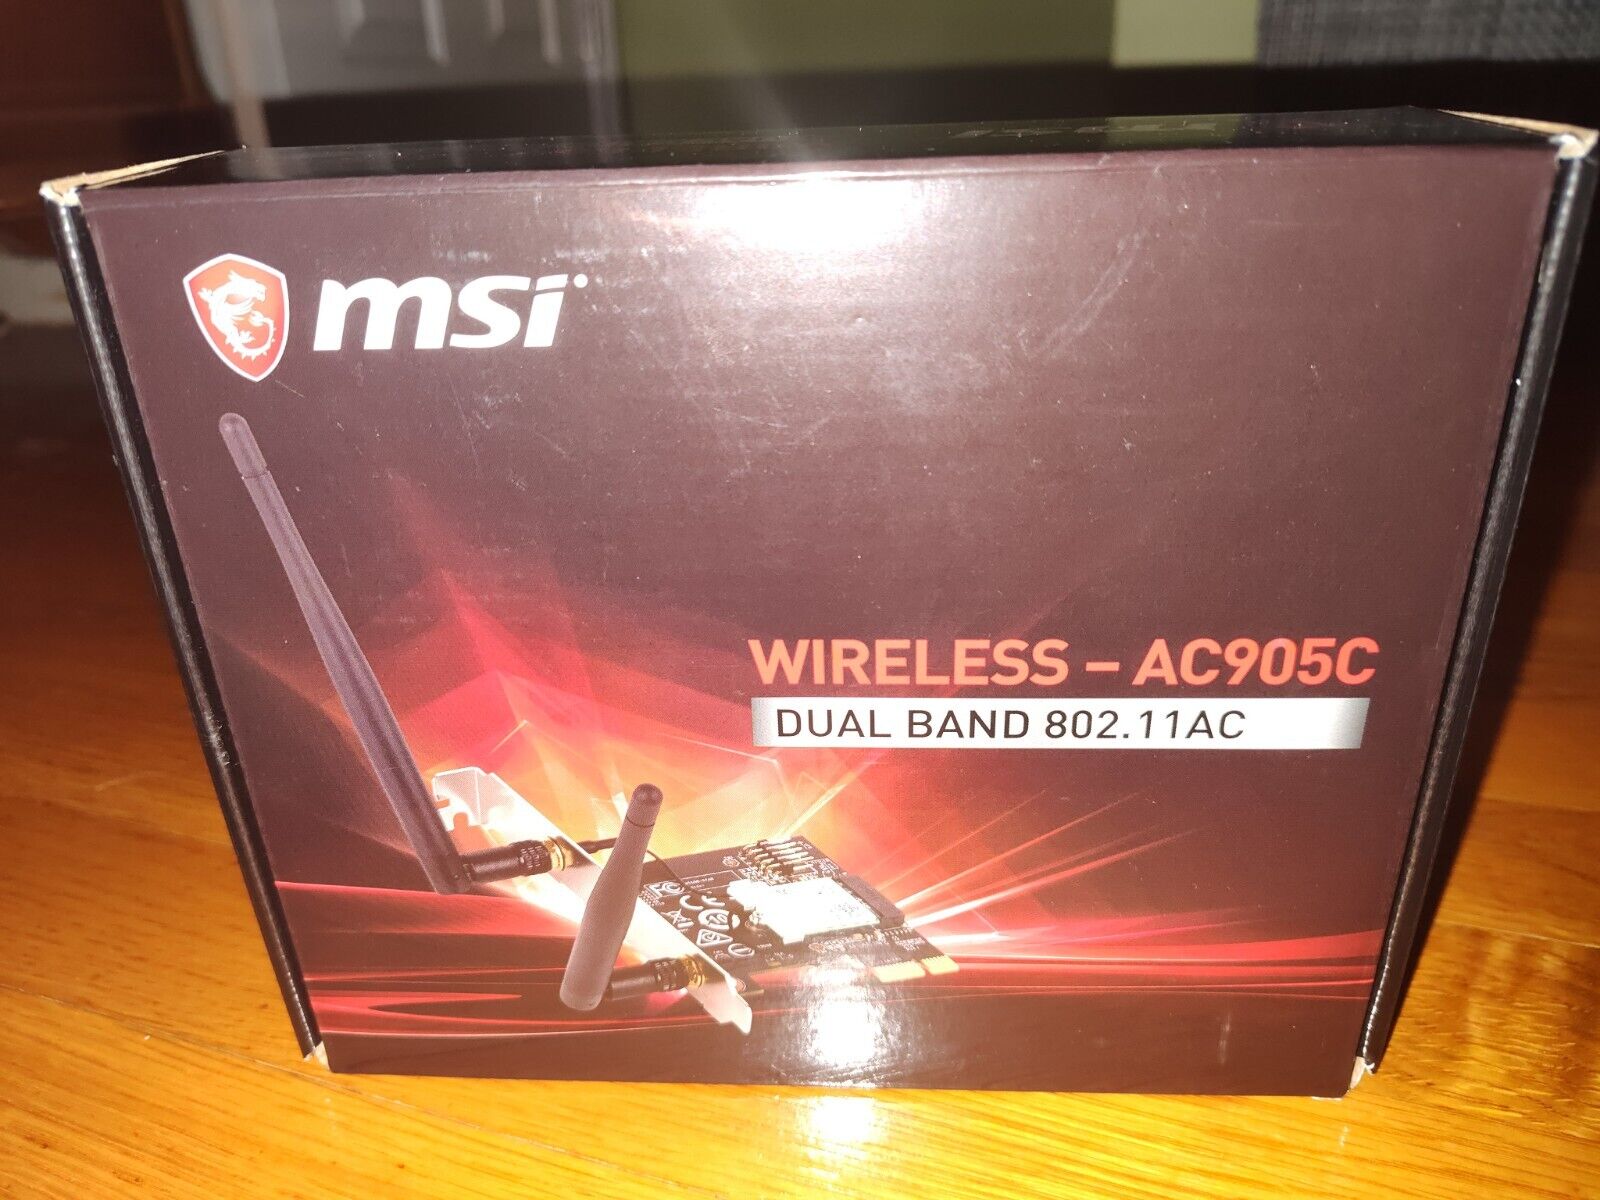 MSI AC905C Wireless PCIe Network Adapter Card